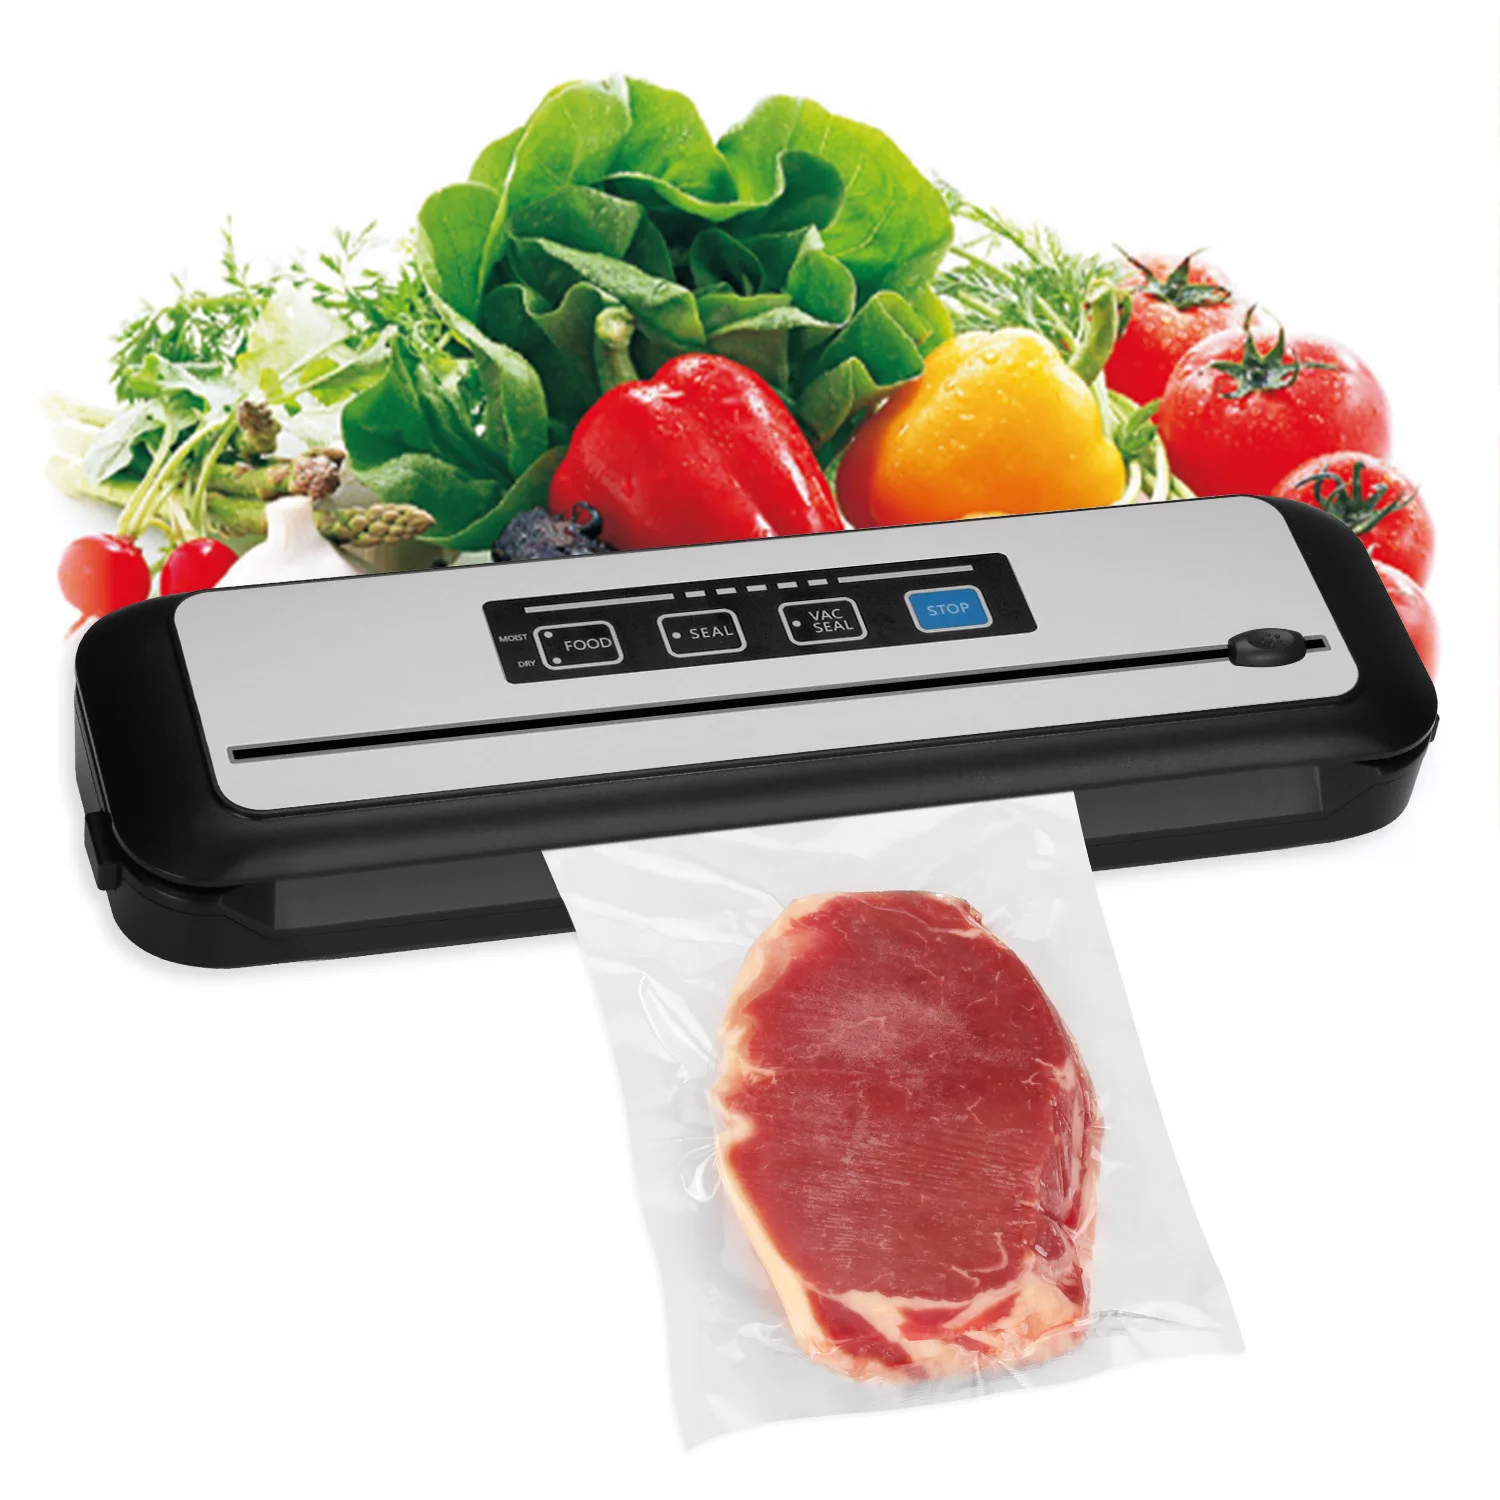 Inkbird Vacuum Sealer Machine with Starter Kit INK-VS01 for Food Preservation US Type / Factory in China